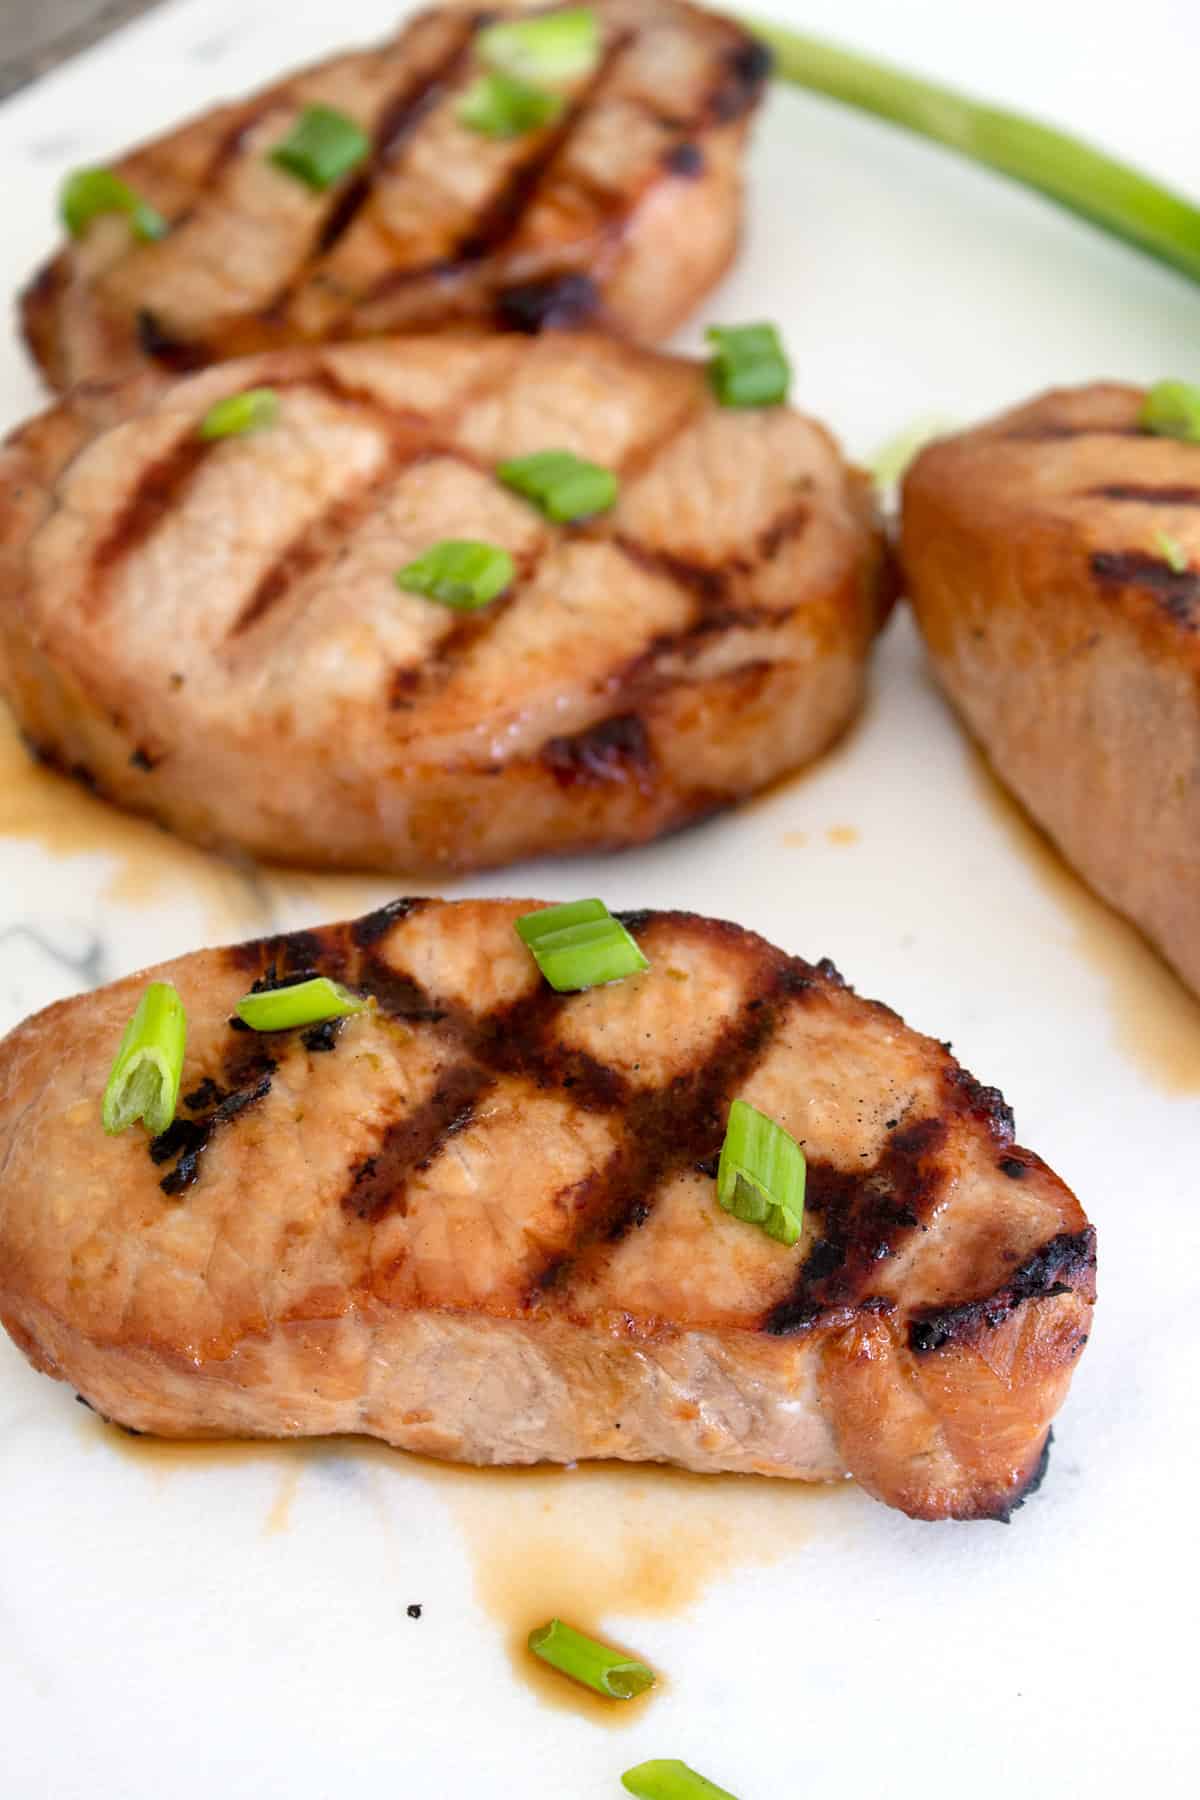 grilled pork chop served on a white cutting board garnished with green onion